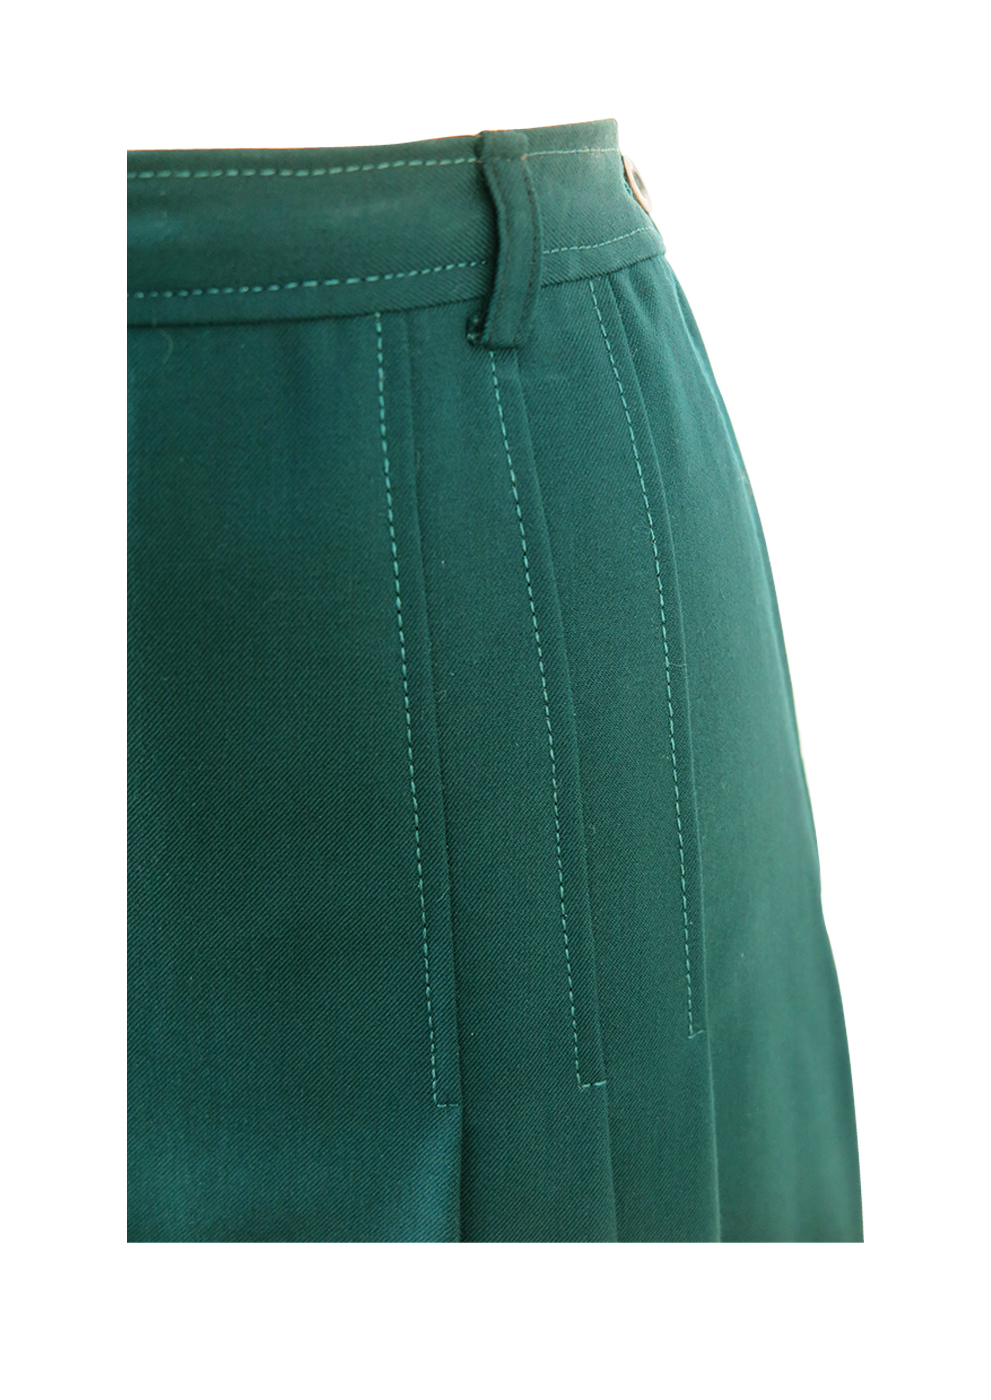 Vintage 70's Bottle Green Flared Midi Skirt with Side Pleat Detail - S ...